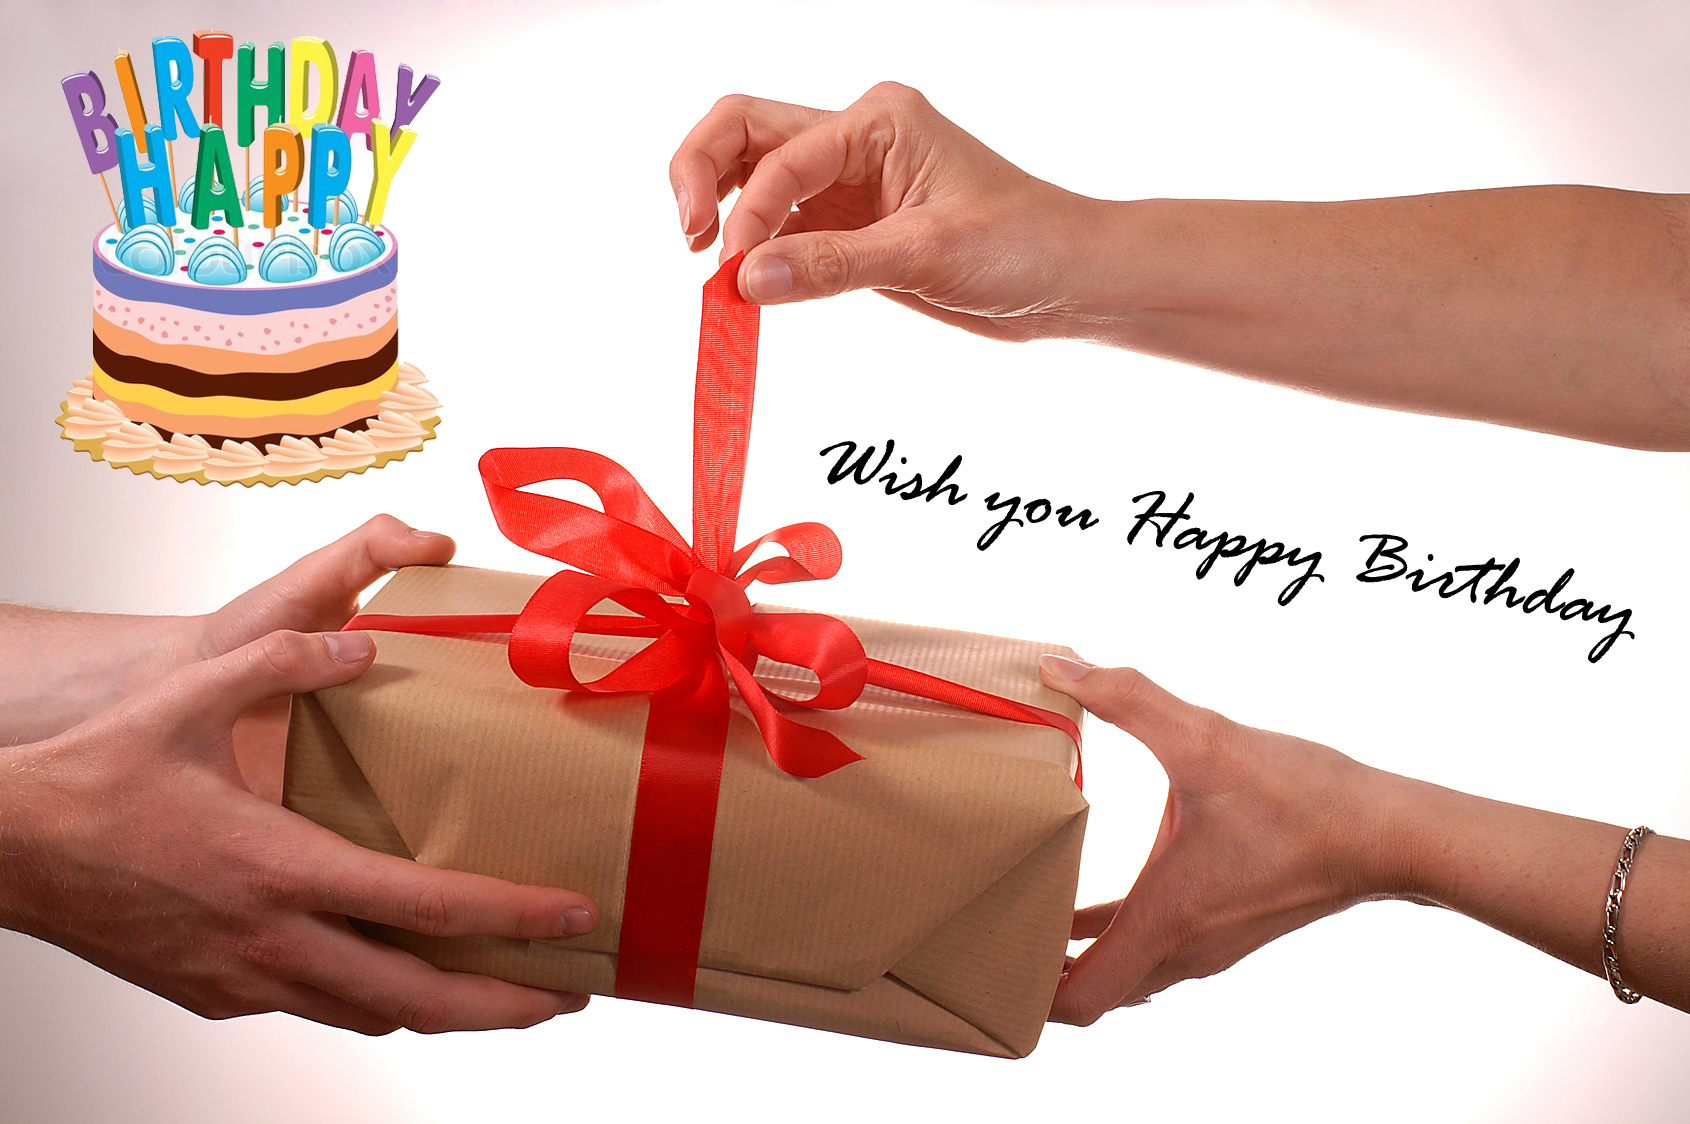 Genuine and Thoughtful Birthday Wishes That Can Bring Happiness to Your Wife 3